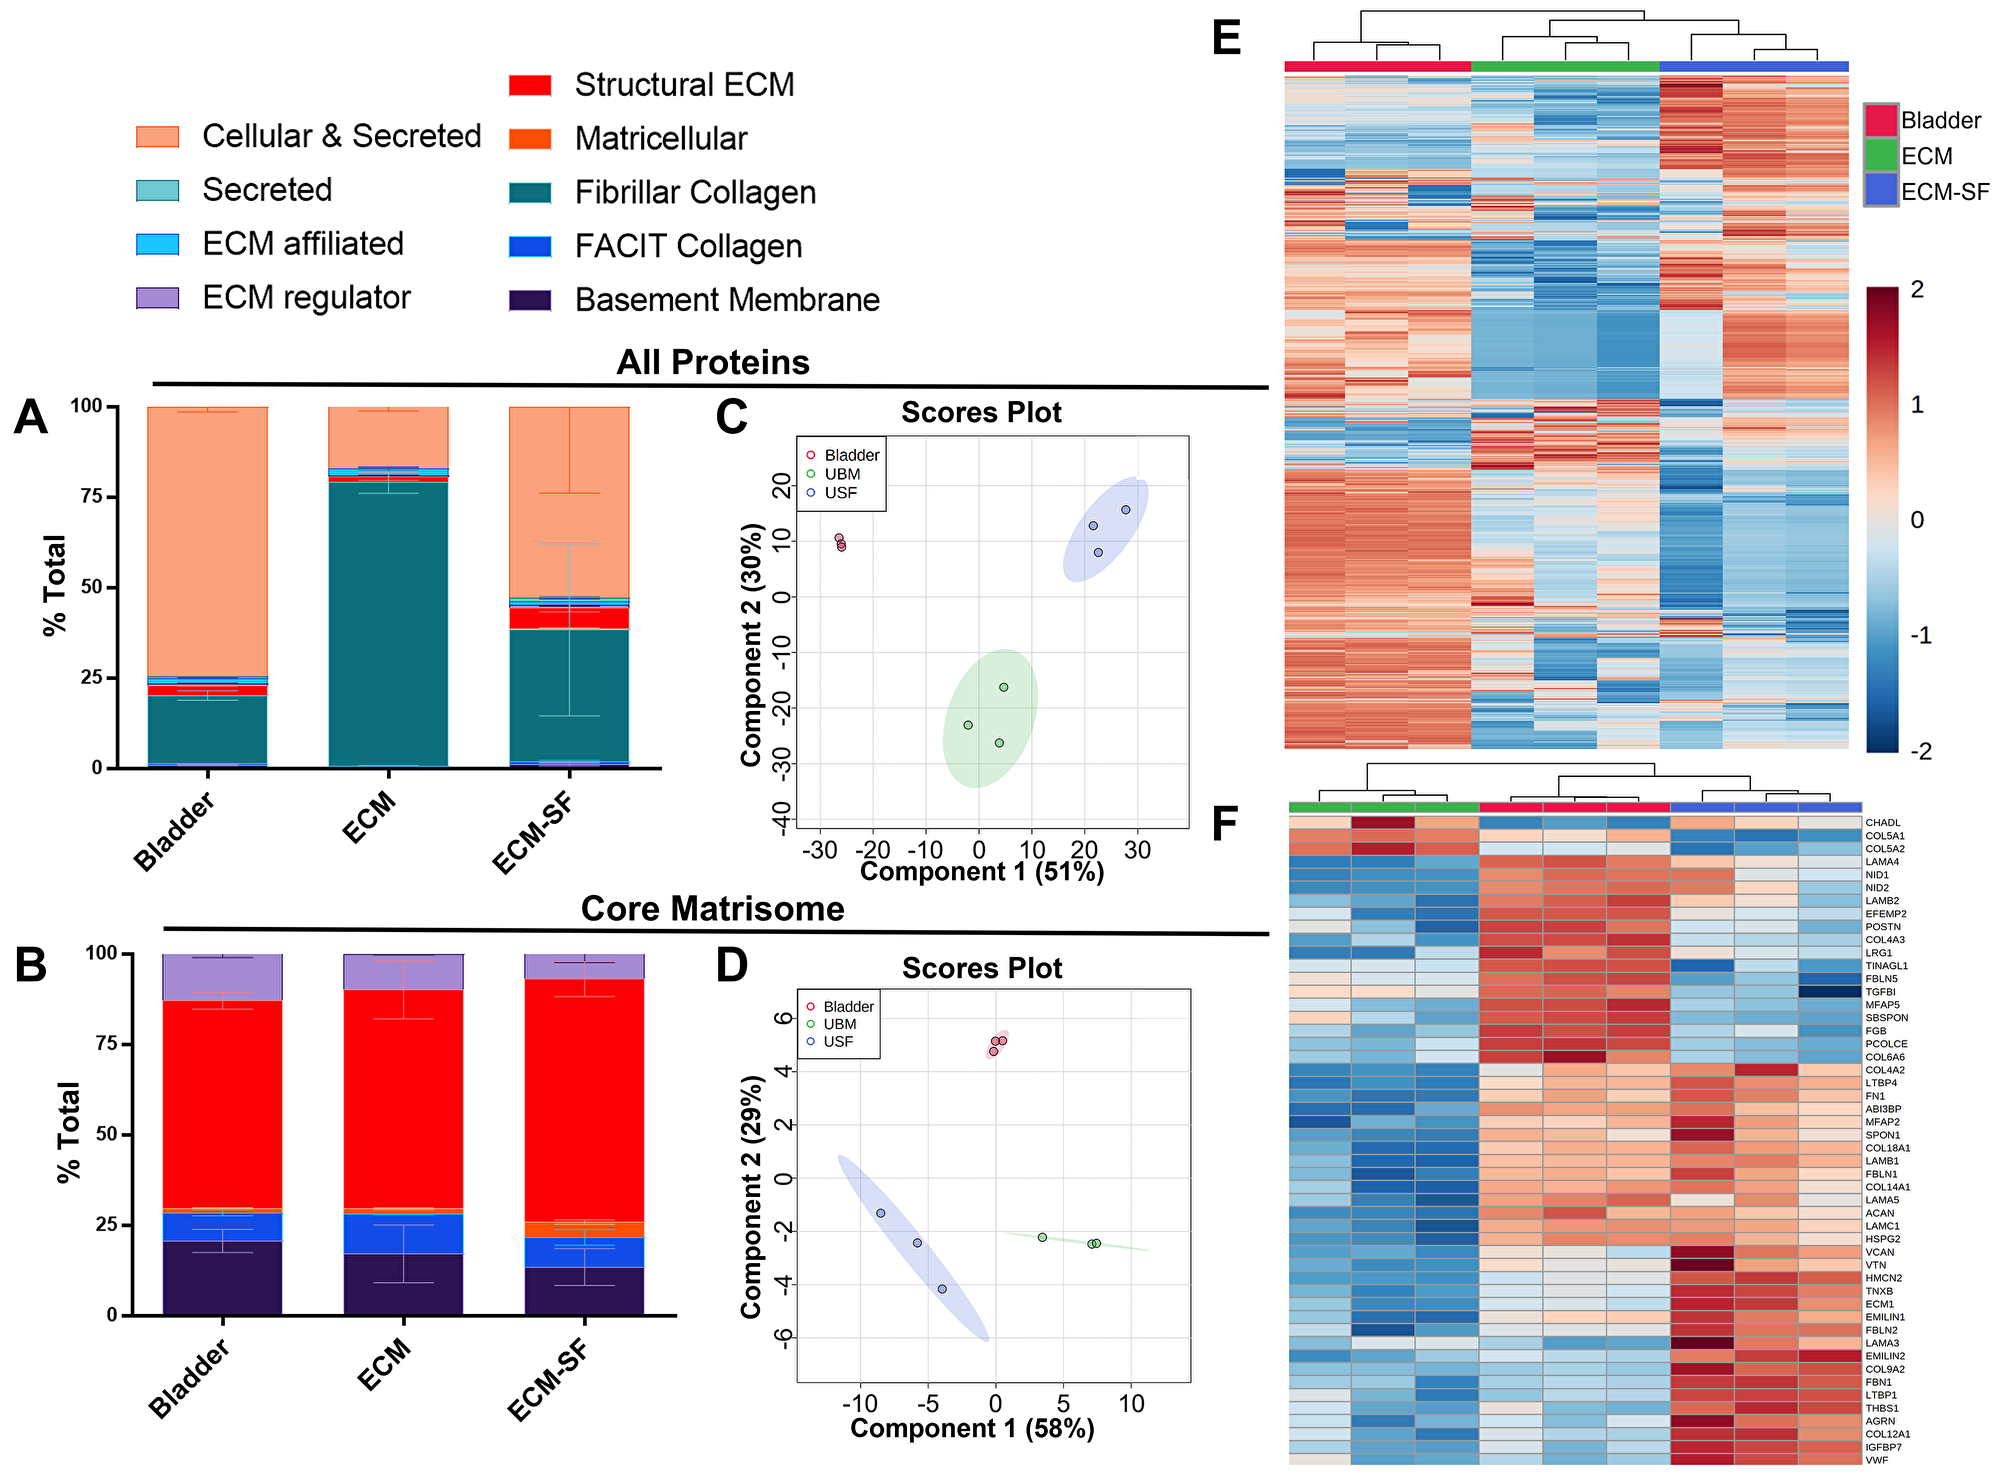 Global and targeted proteomic analysis of bladder, ECM, and ECM-SF.